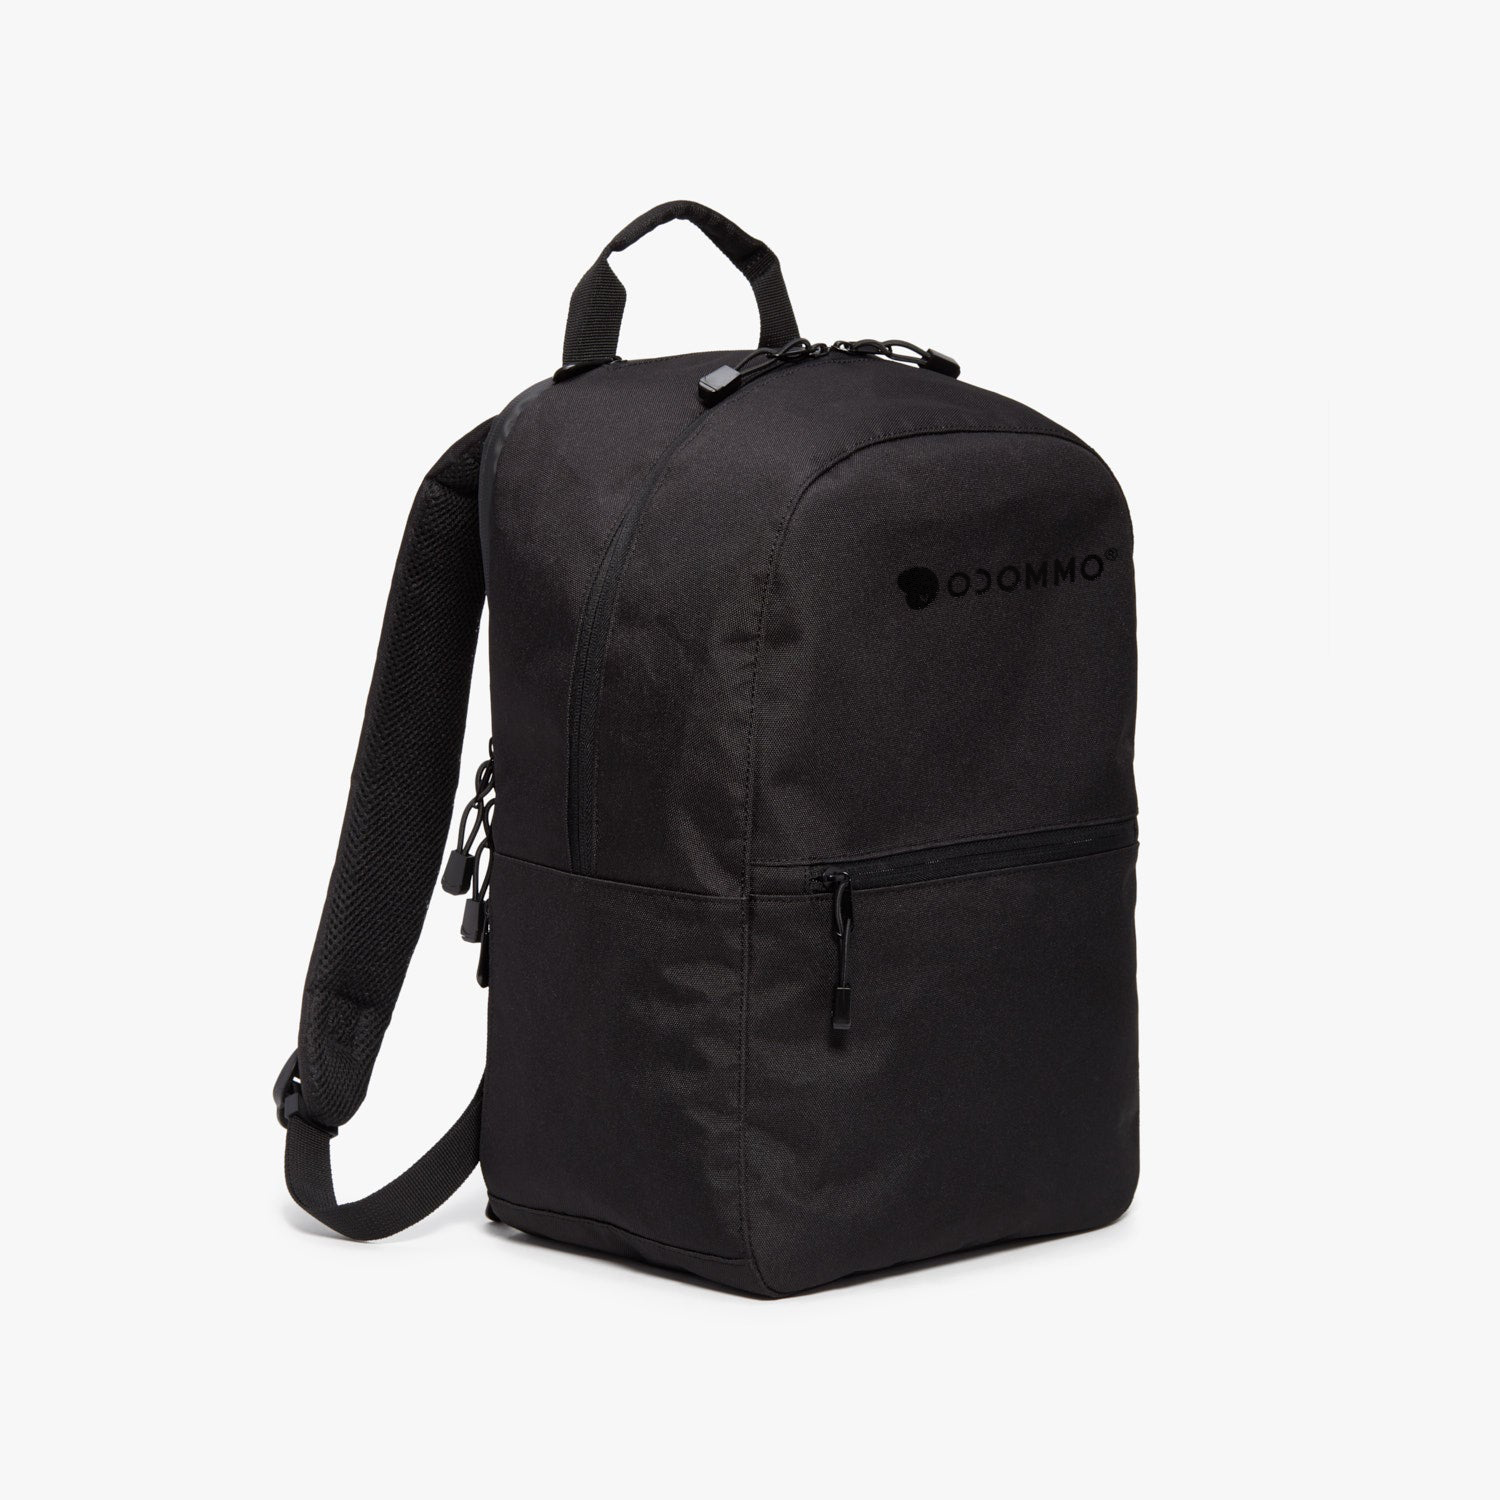 OCOMMO Durable Canvas Backpack